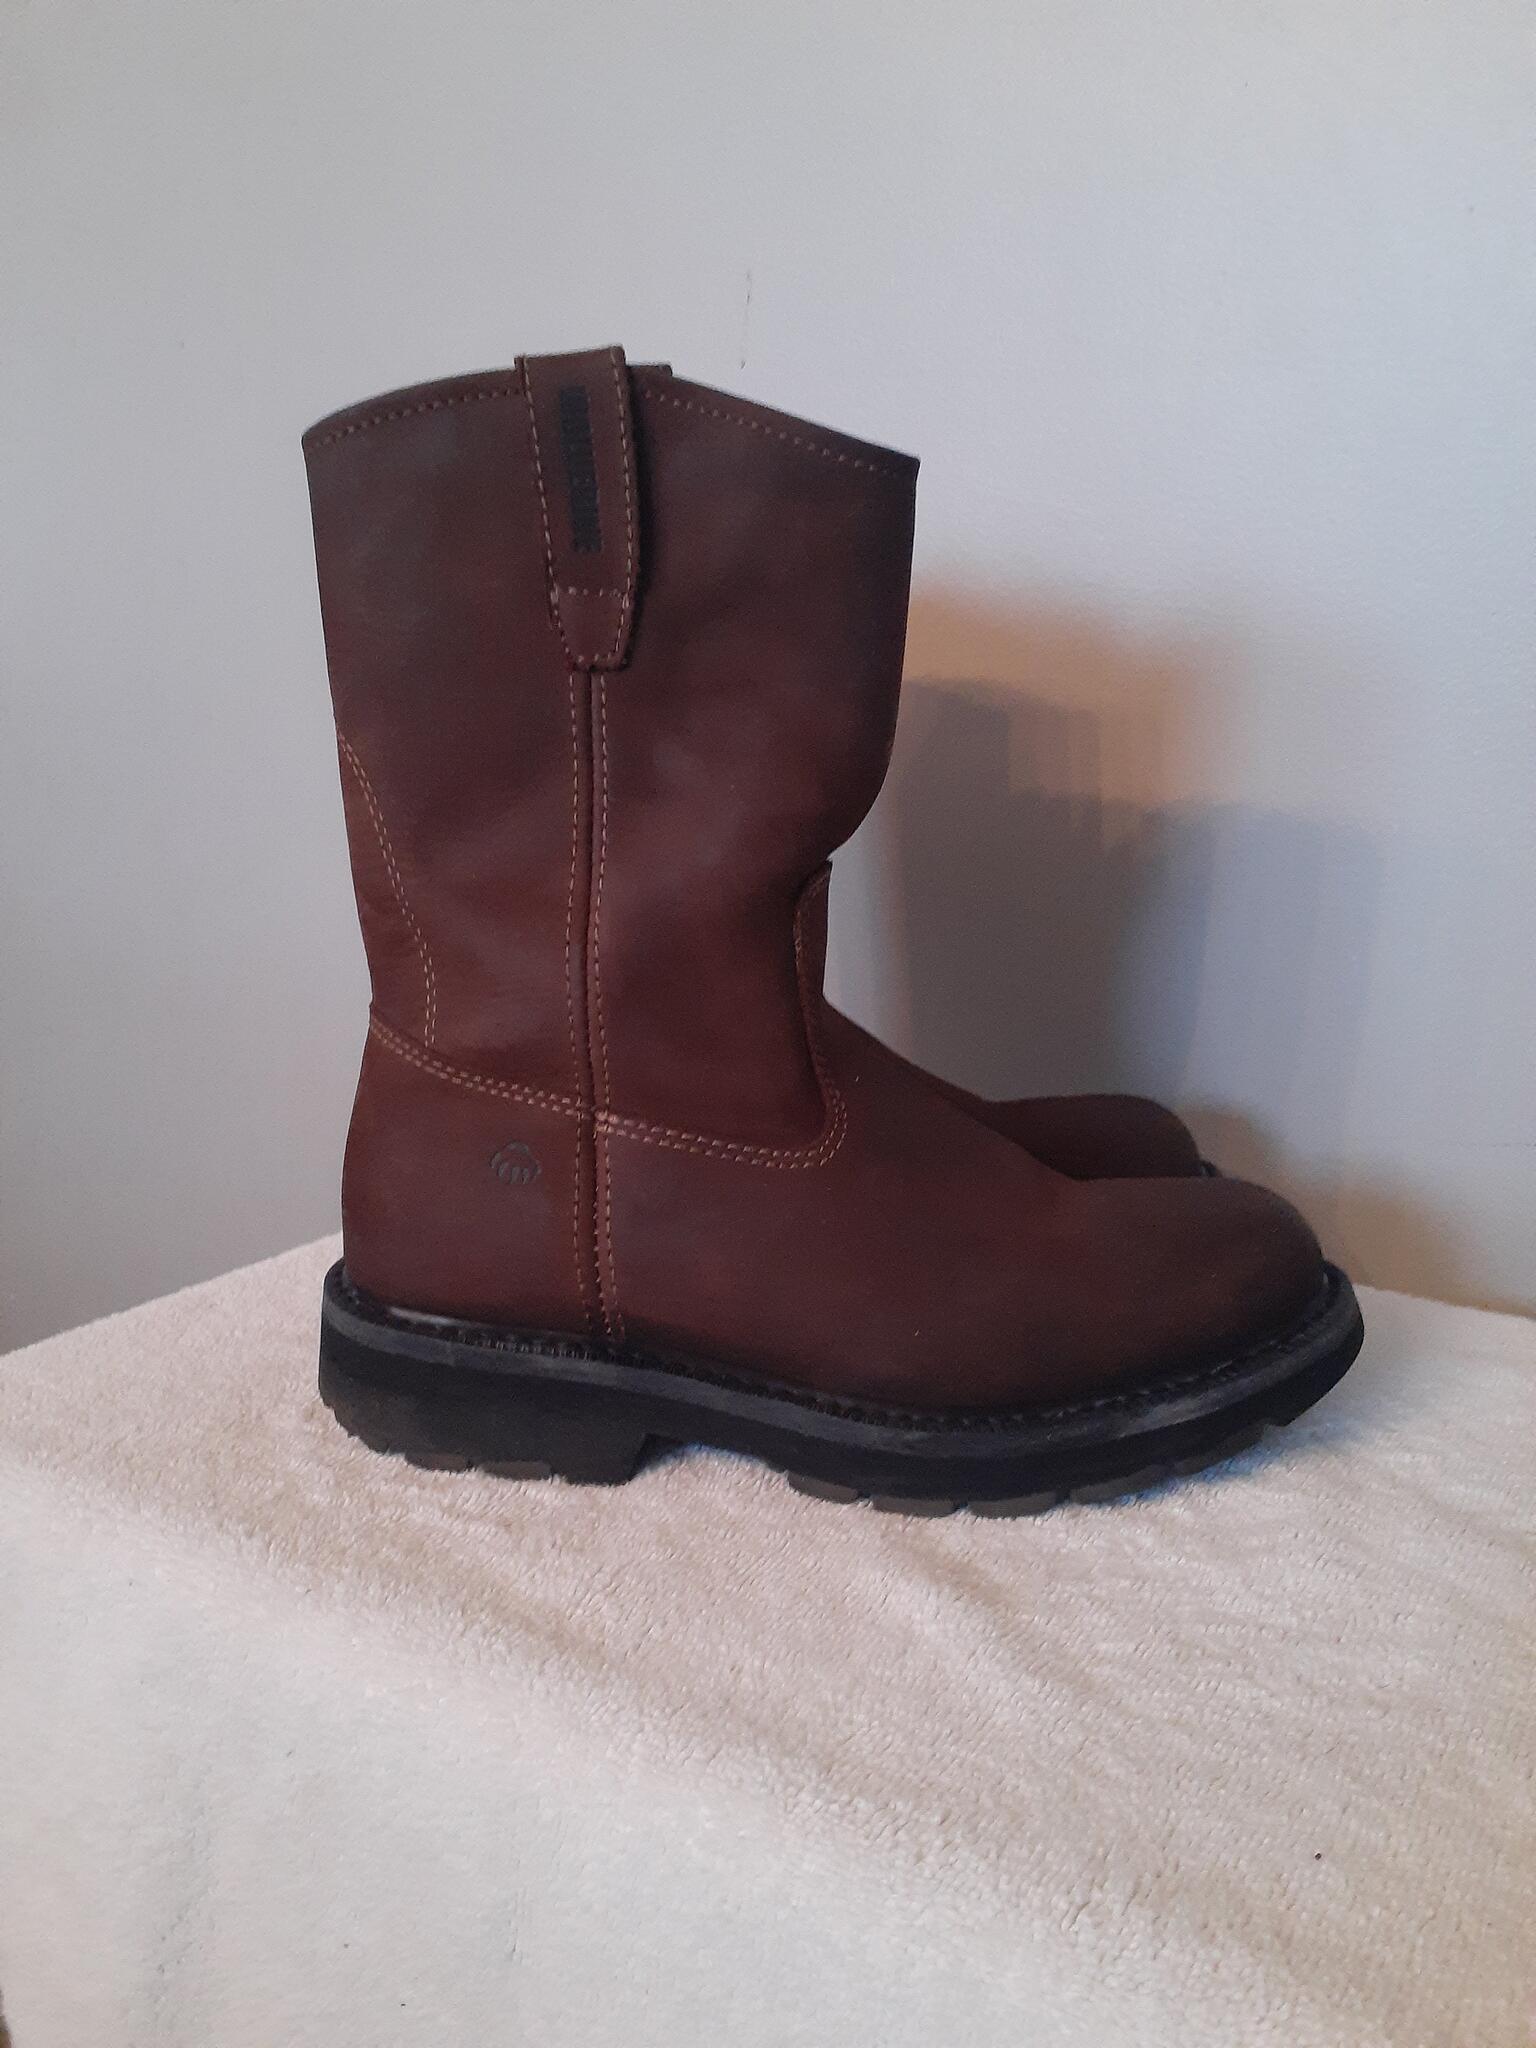 mens Wolverine boots size 9 for $20 in Indianapolis, IN | For Sale ...